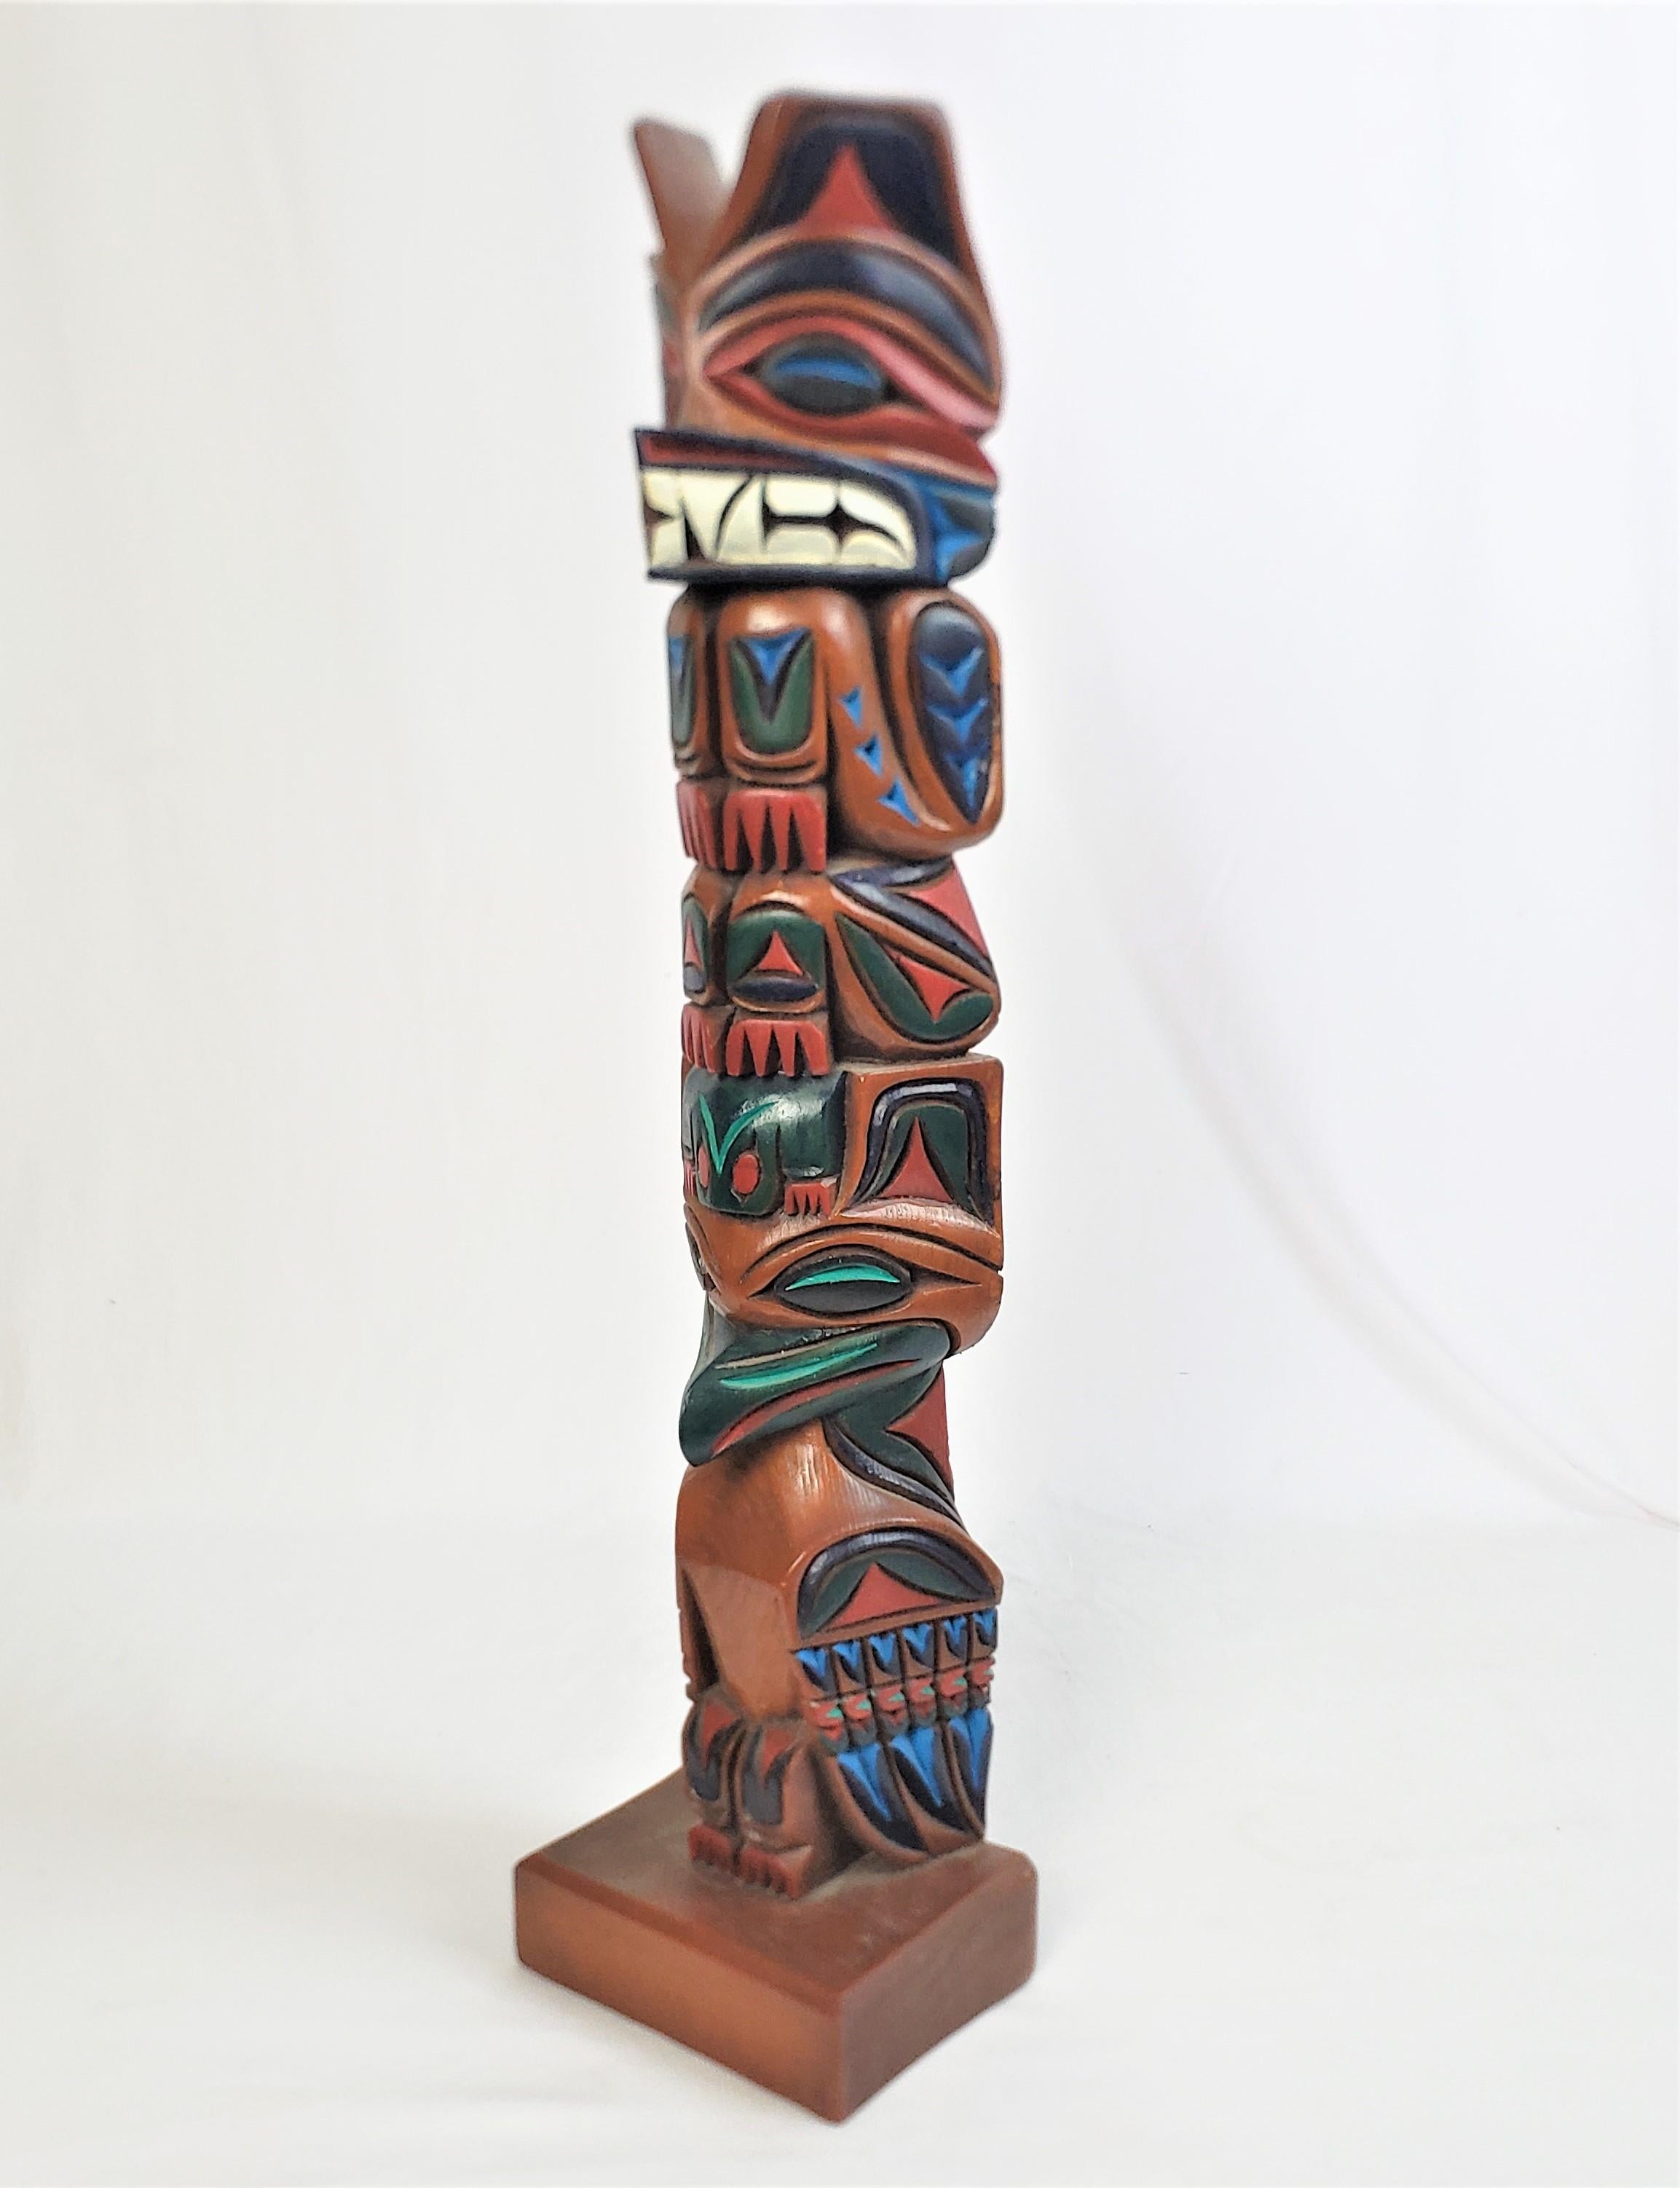 This folk art carved and polychrome painted totem pole is signed by an unknown artist and originated from the United States and dates to 1985 and done in a West Coast Haida style. The totem is composed of cedar and is hand-carved with stylized